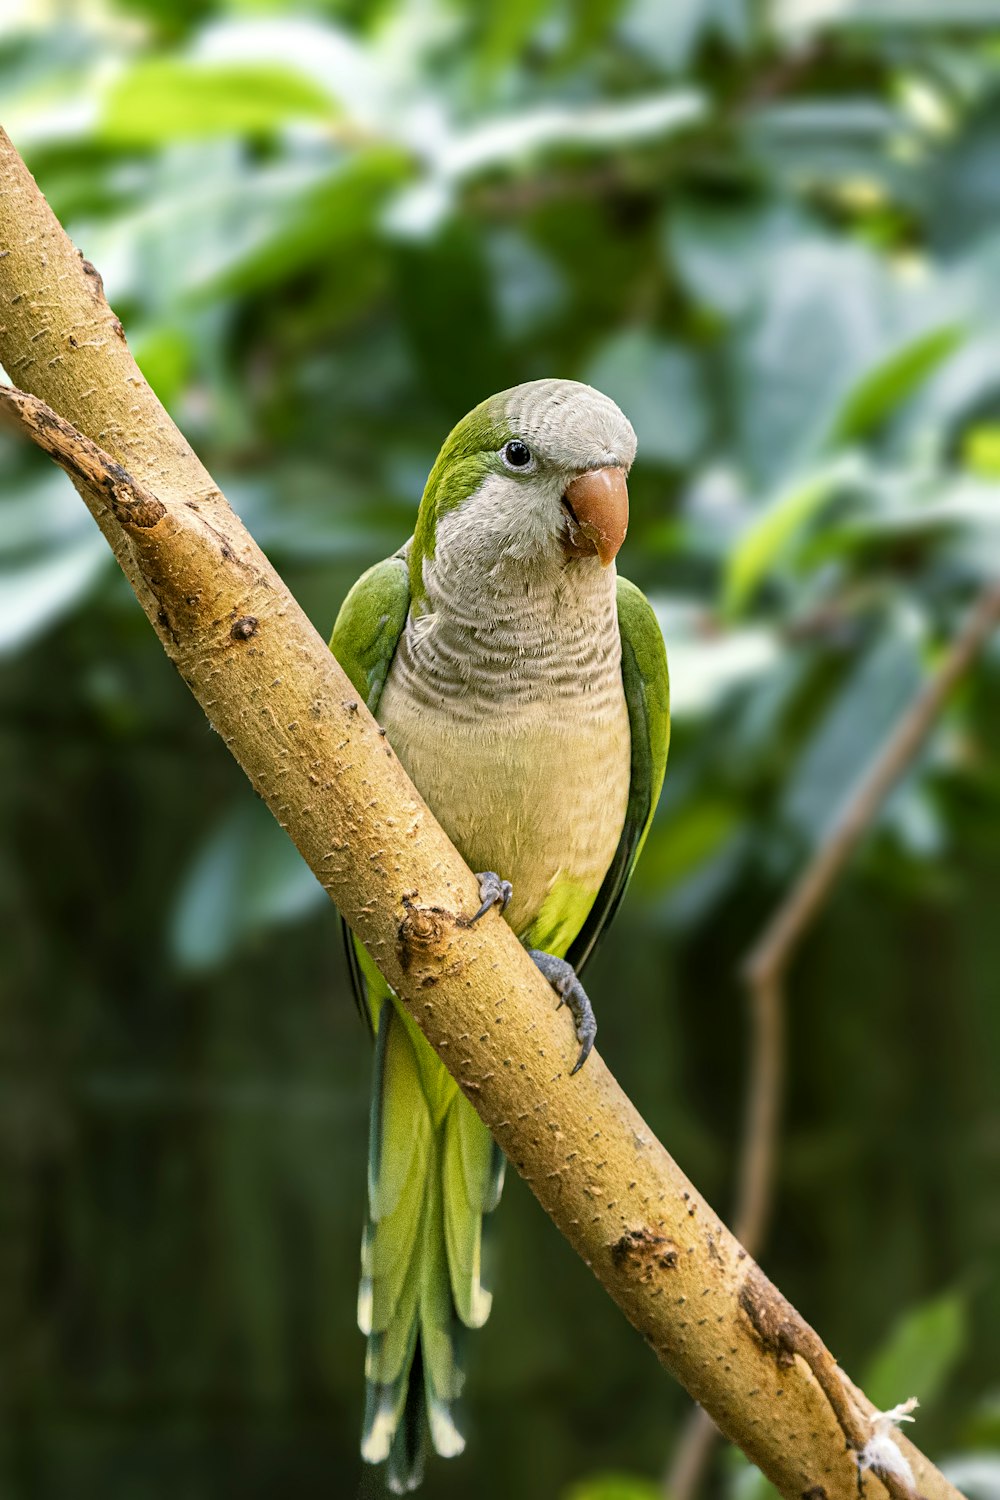 a bird perched on a branch in a tree